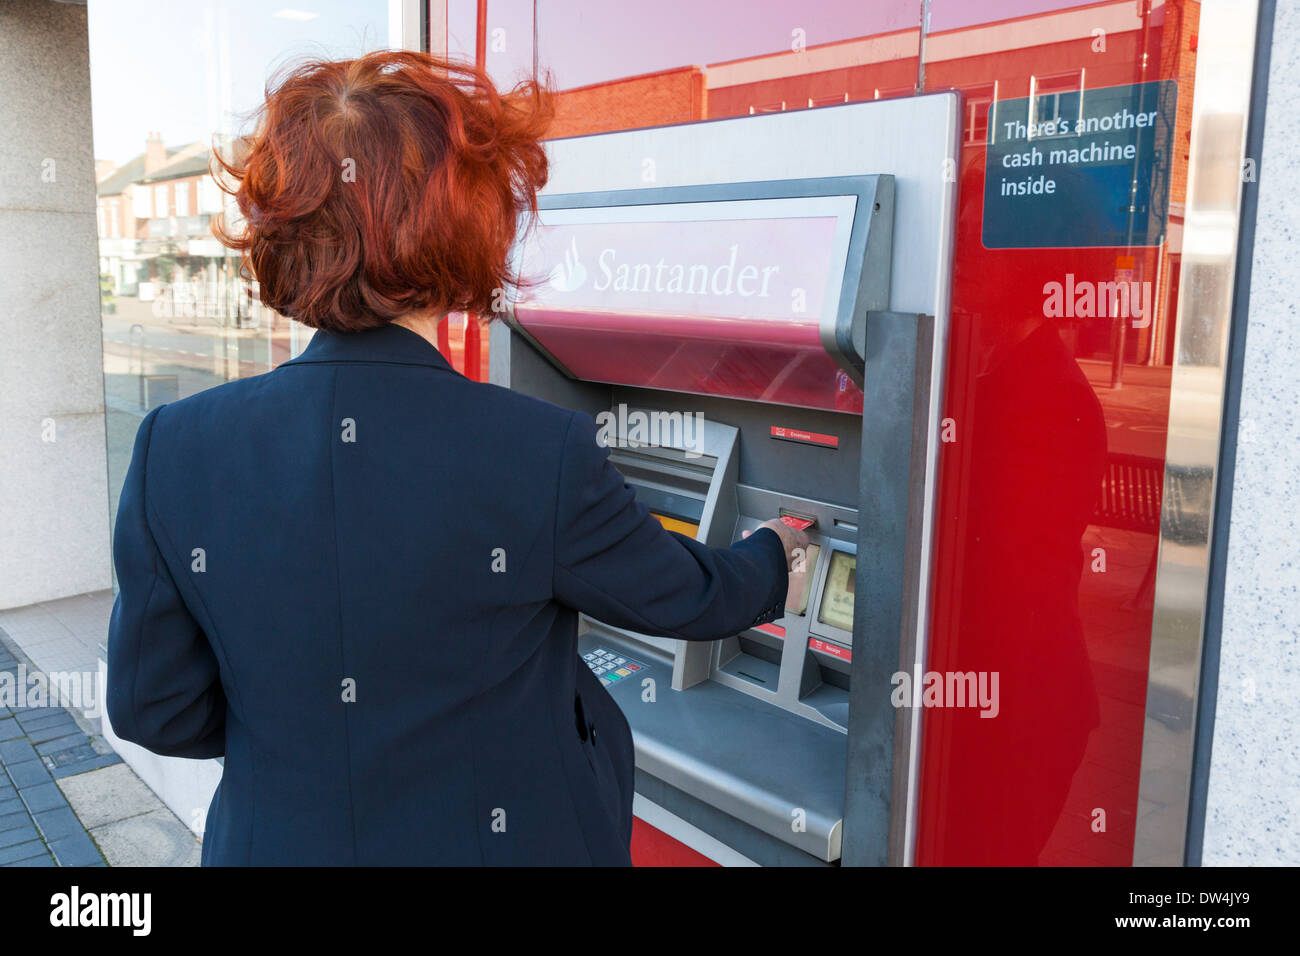 Person inserting a card into an ATM cash machine at a Santander bank to make a cash withdrawal, Nottinghamshire, England, UK Stock Photo